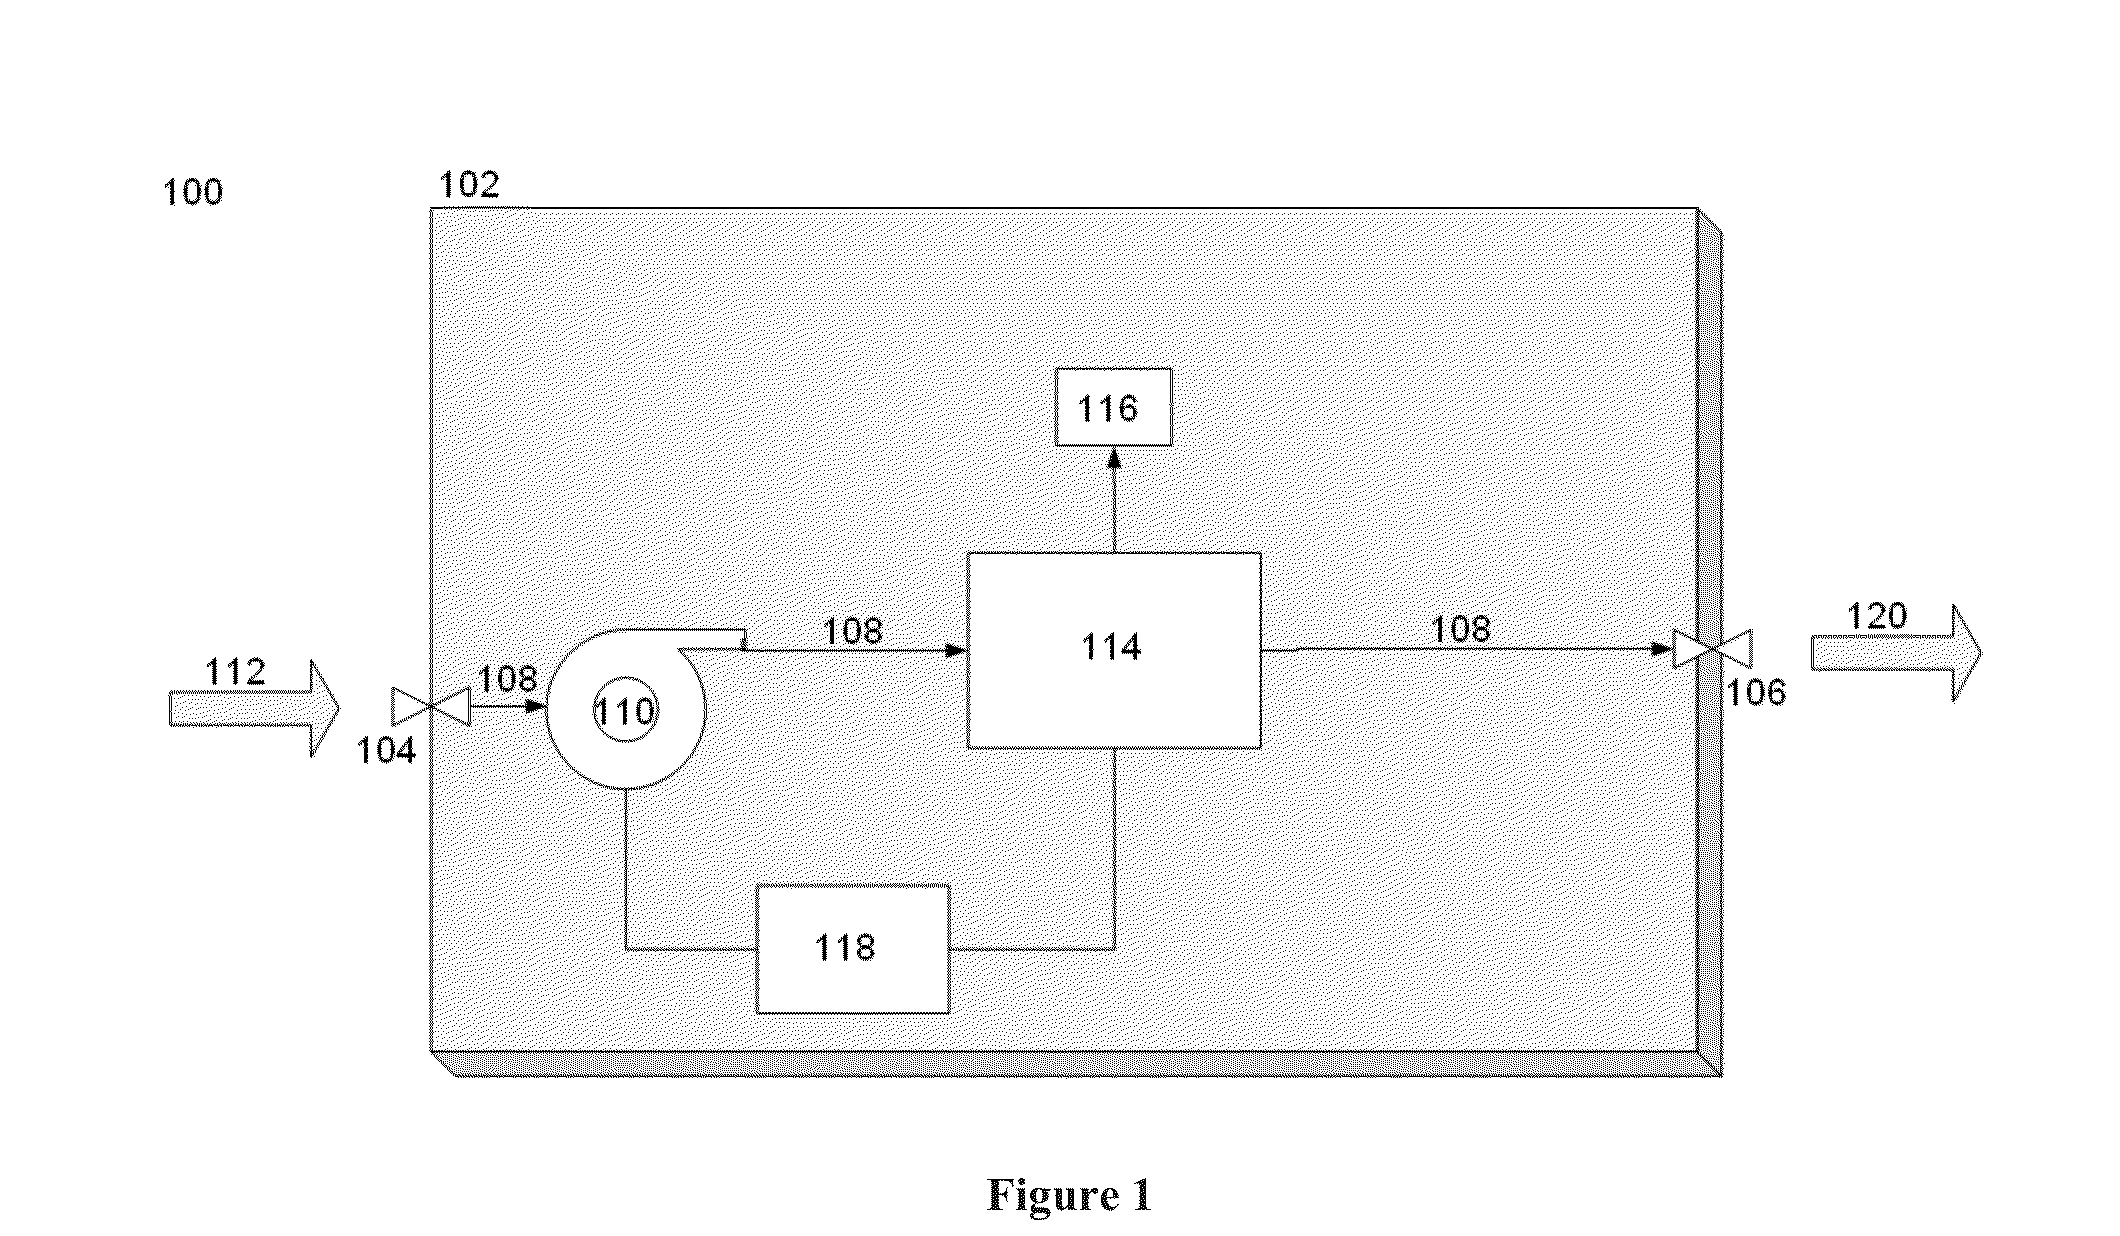 Mercury sensor for detecting, differentiating, and measuring organic and inorganic mercury compounds